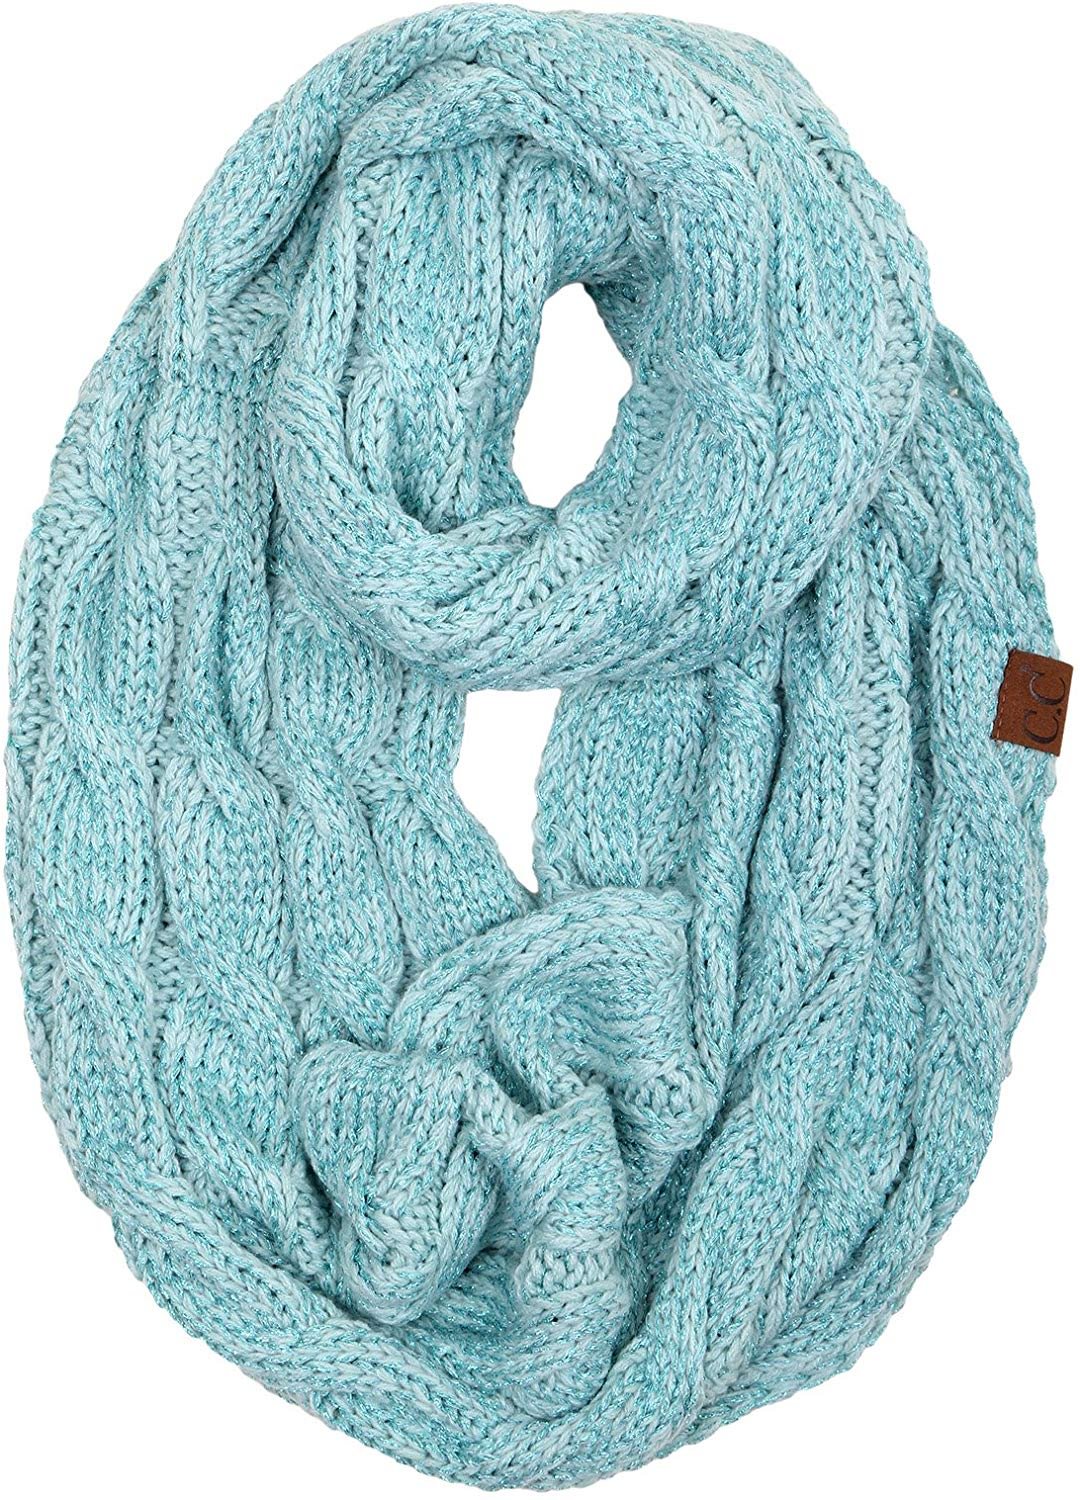 Beanies Matching Ribbed Winter Warm Cable Knit Infinity Scarf